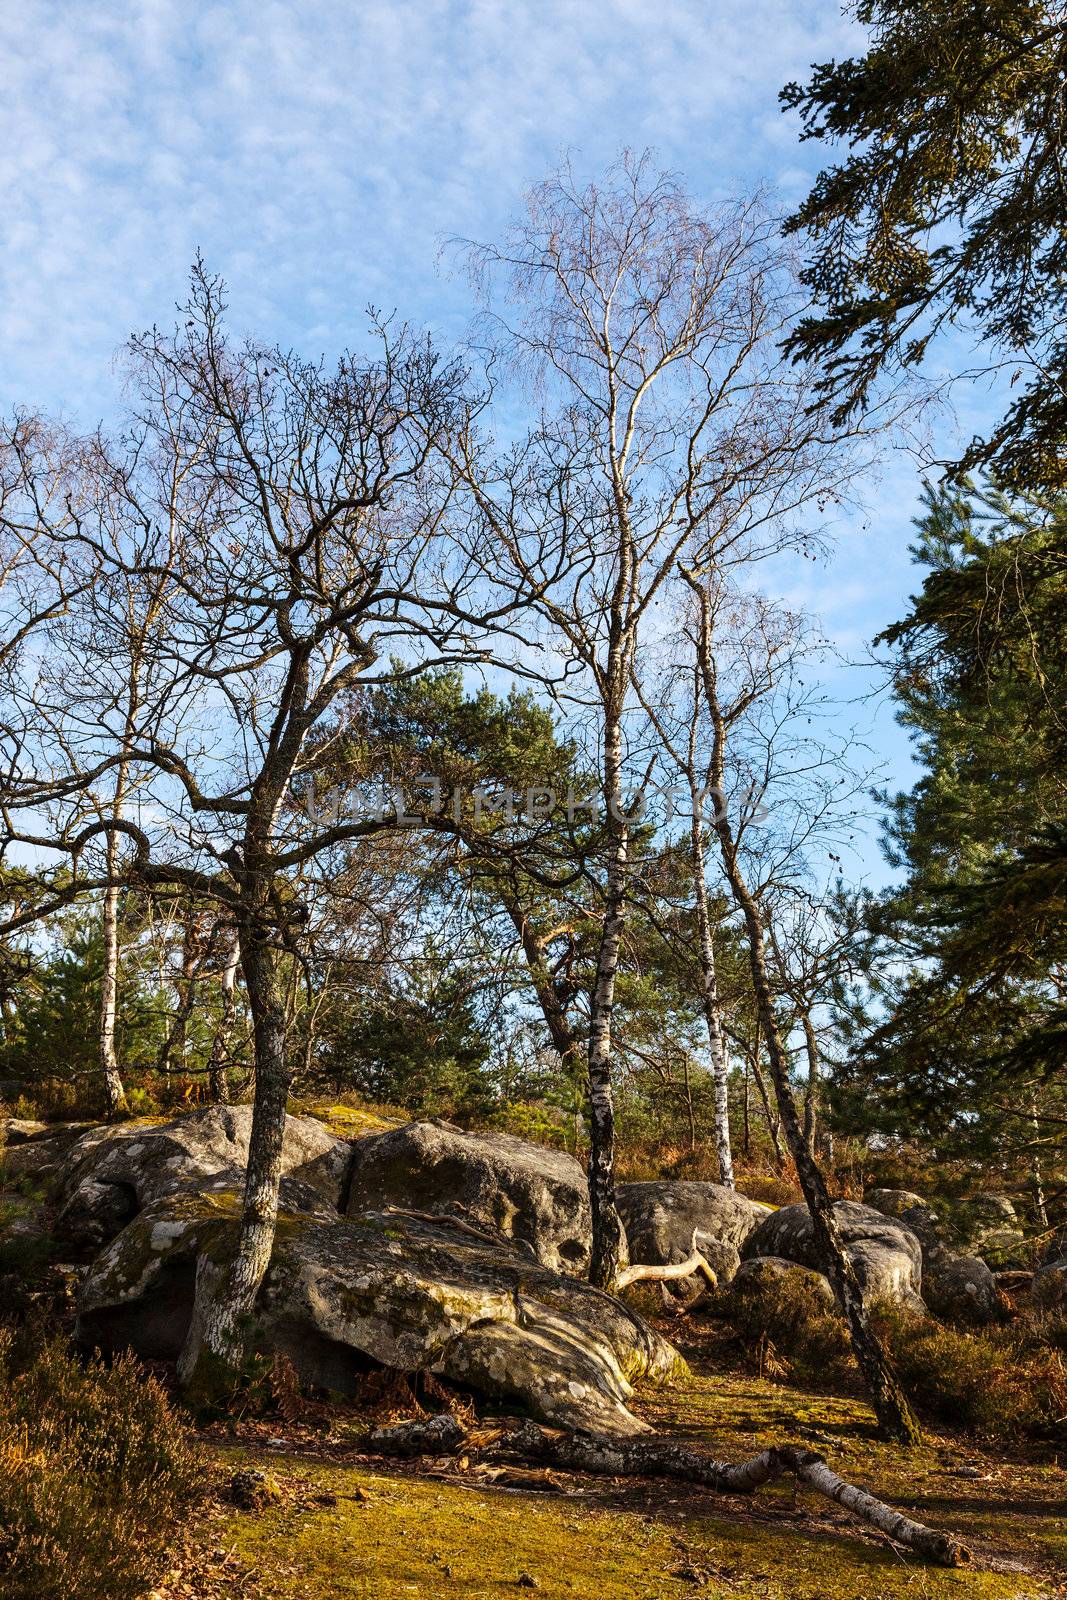 Landscape in the forest of Fontainebleau in the early spring.